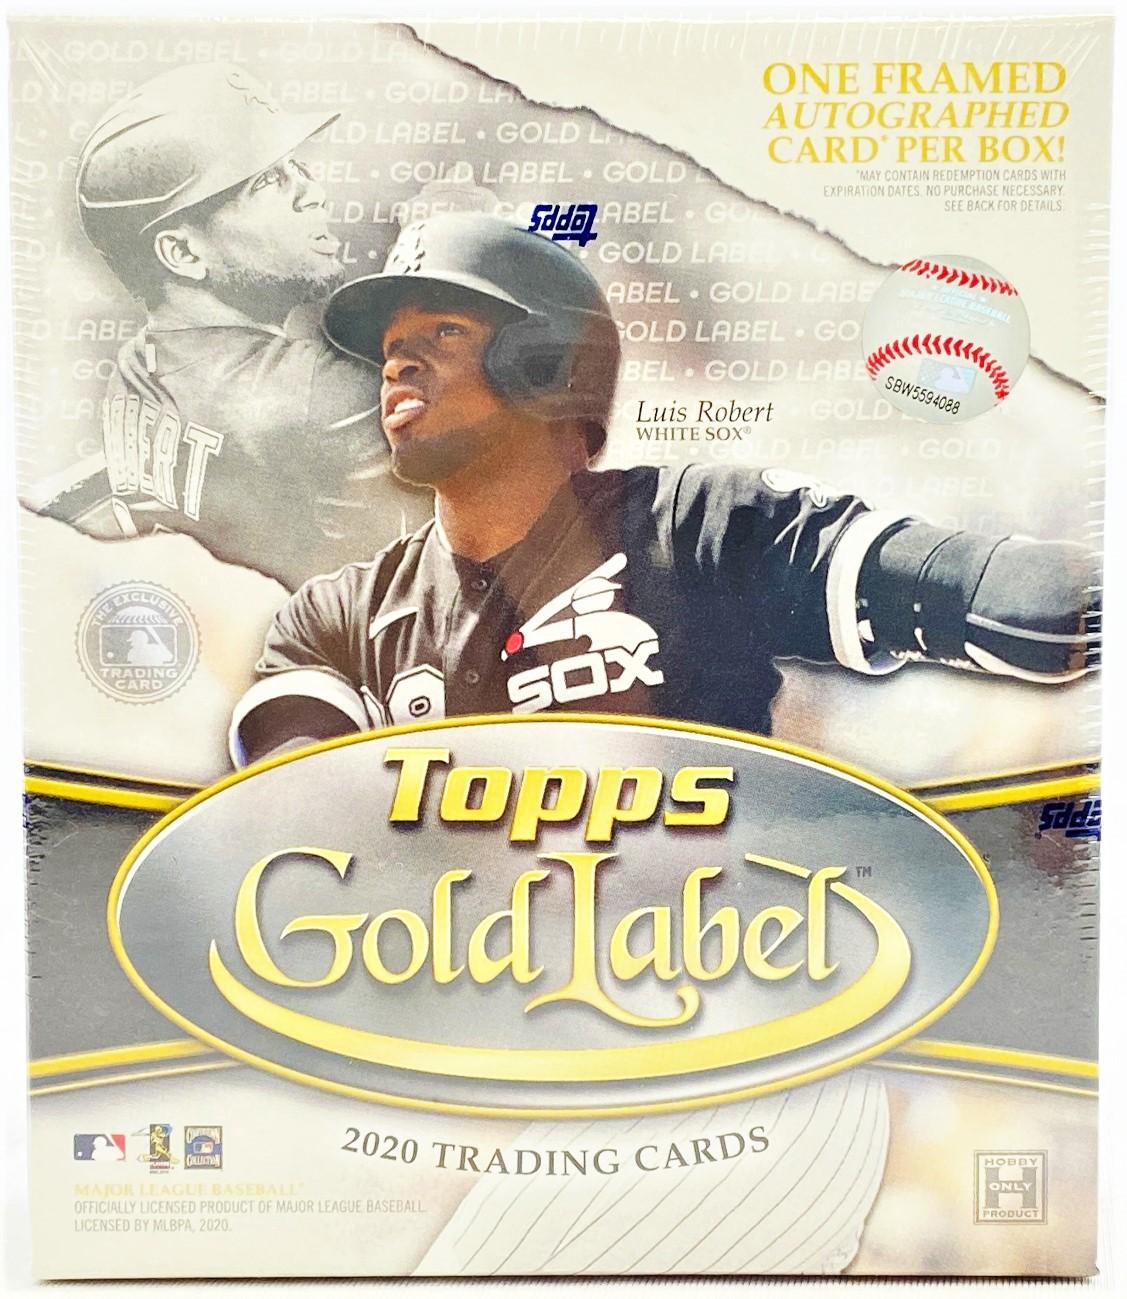 topps gold label